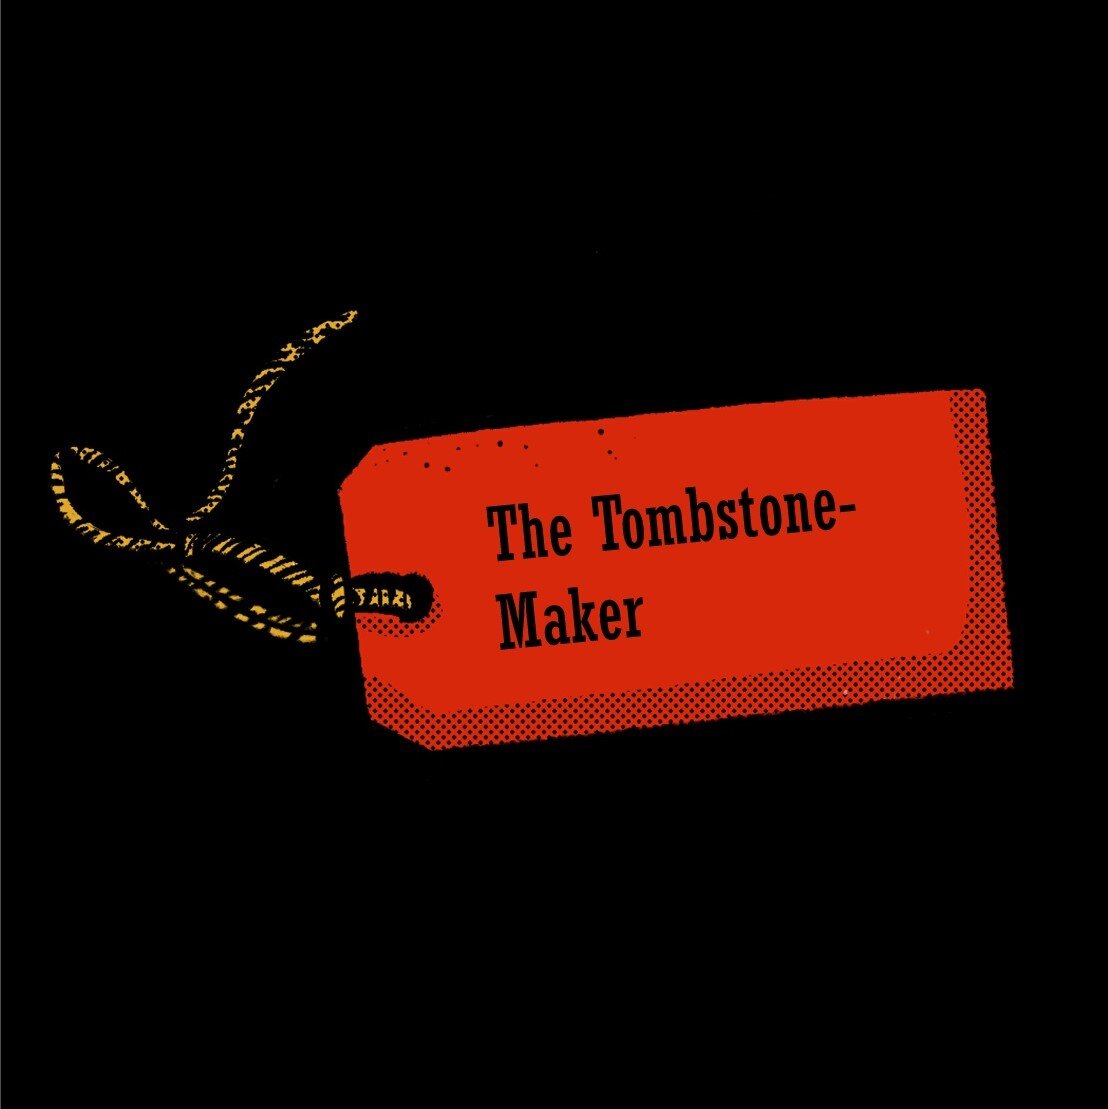 Episode 7: The Tombstone Maker